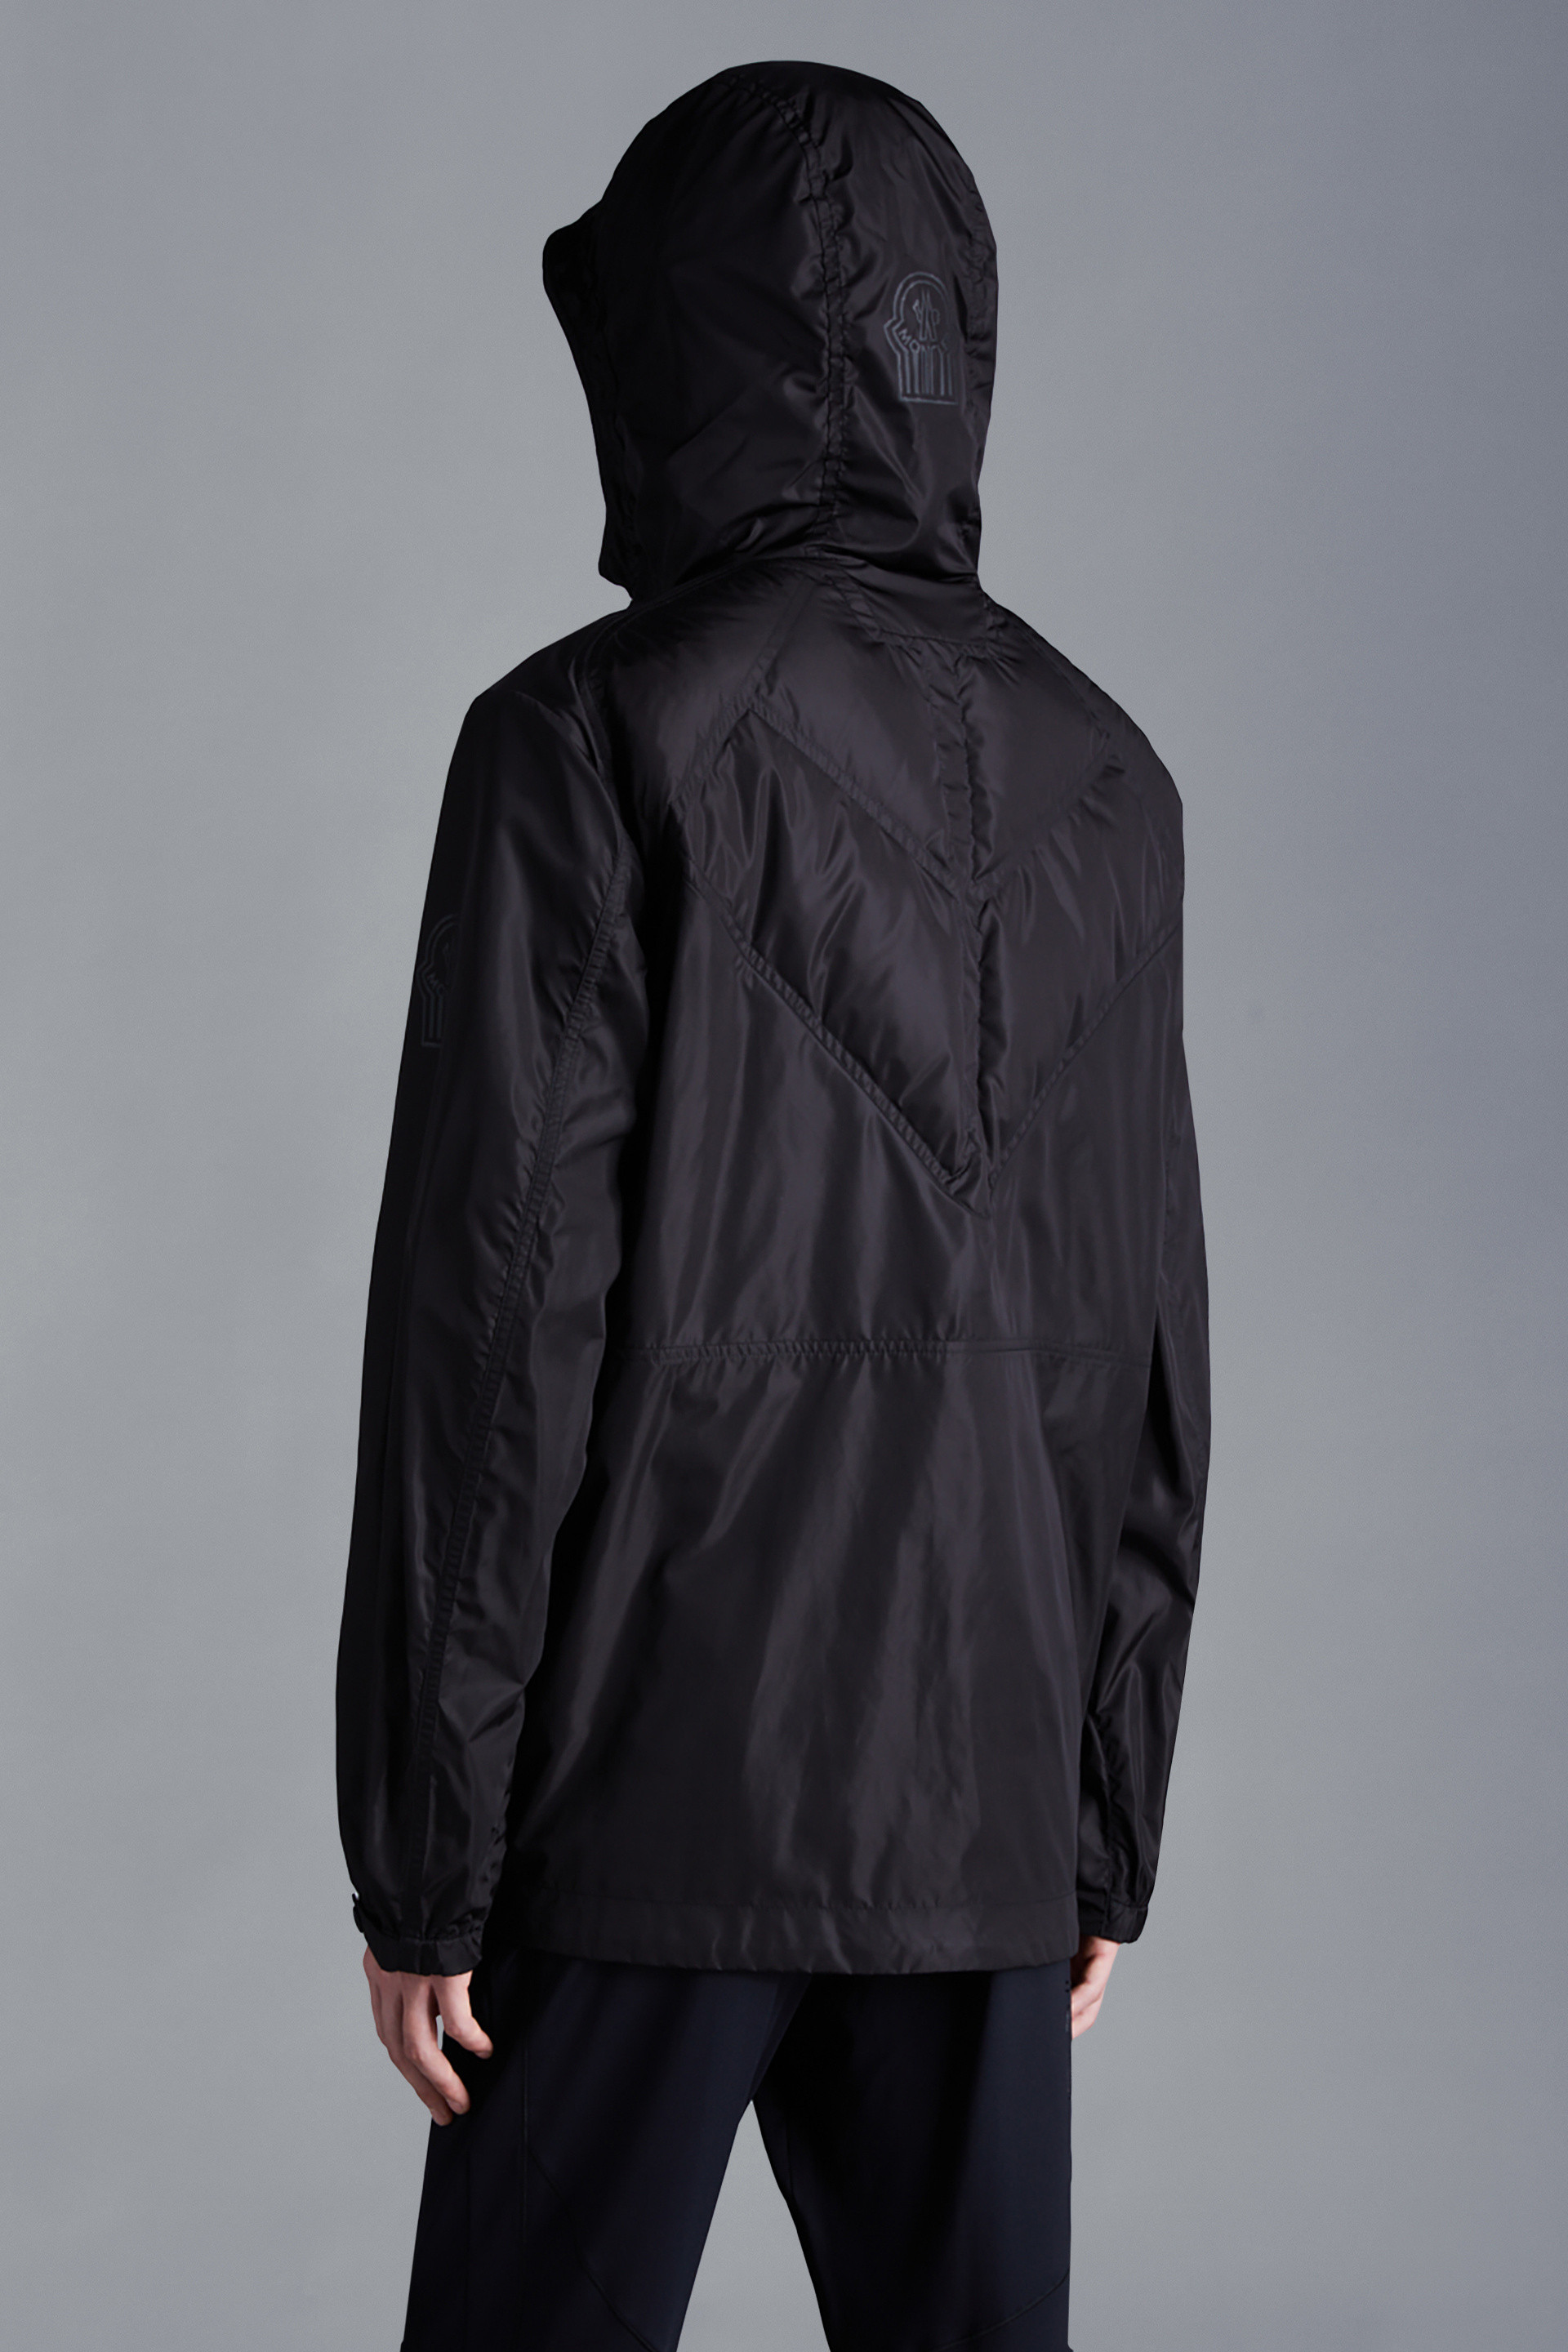 Moncler Genius - View All The Collections | Moncler